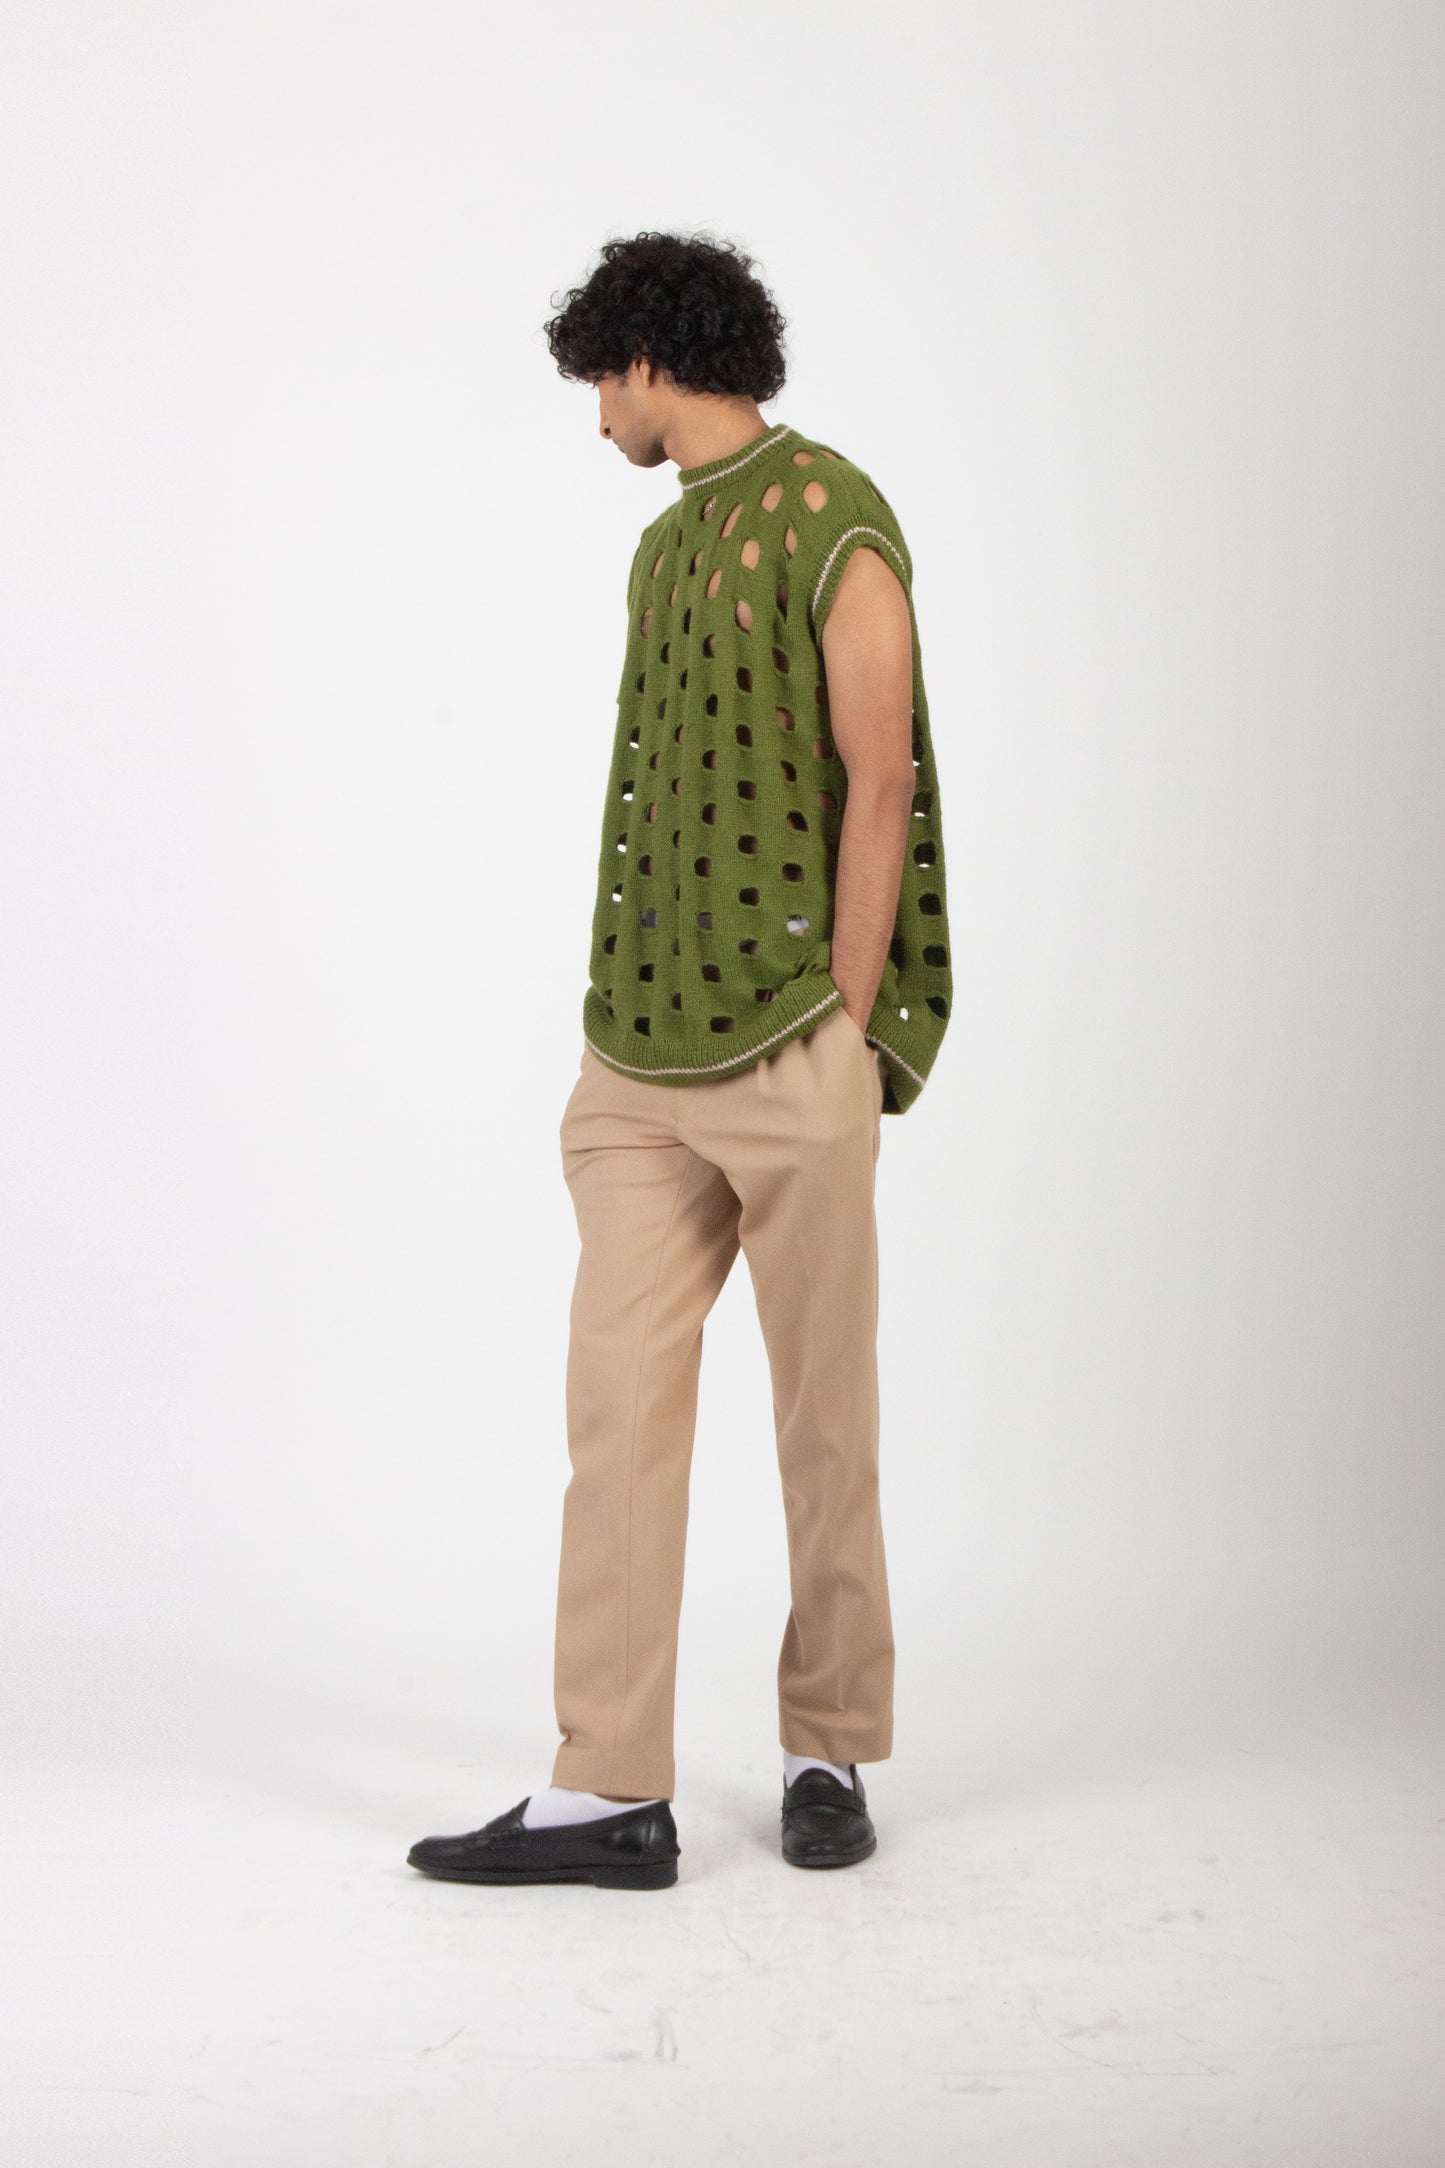 Cut Out Hand Knitted Vest